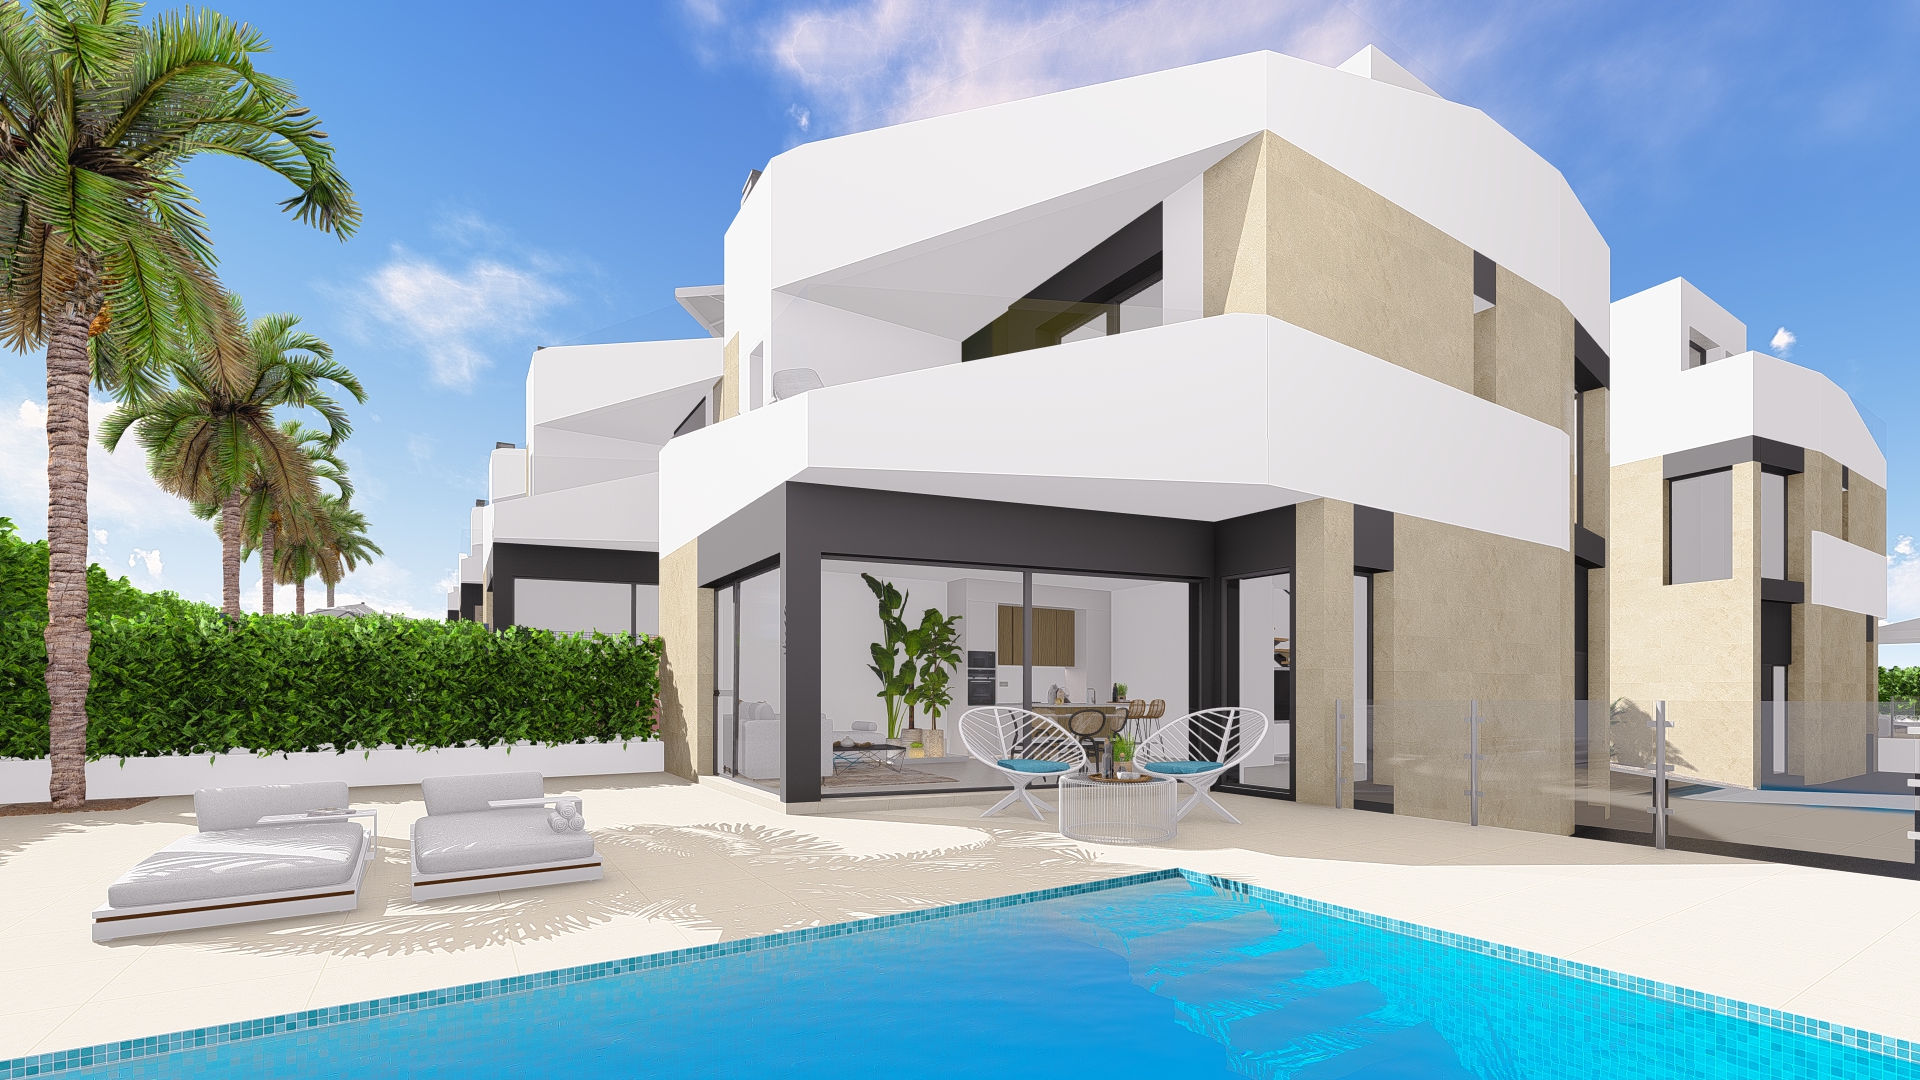 Luxury residential complex with various semi-detached villas in Orihuela Costa: